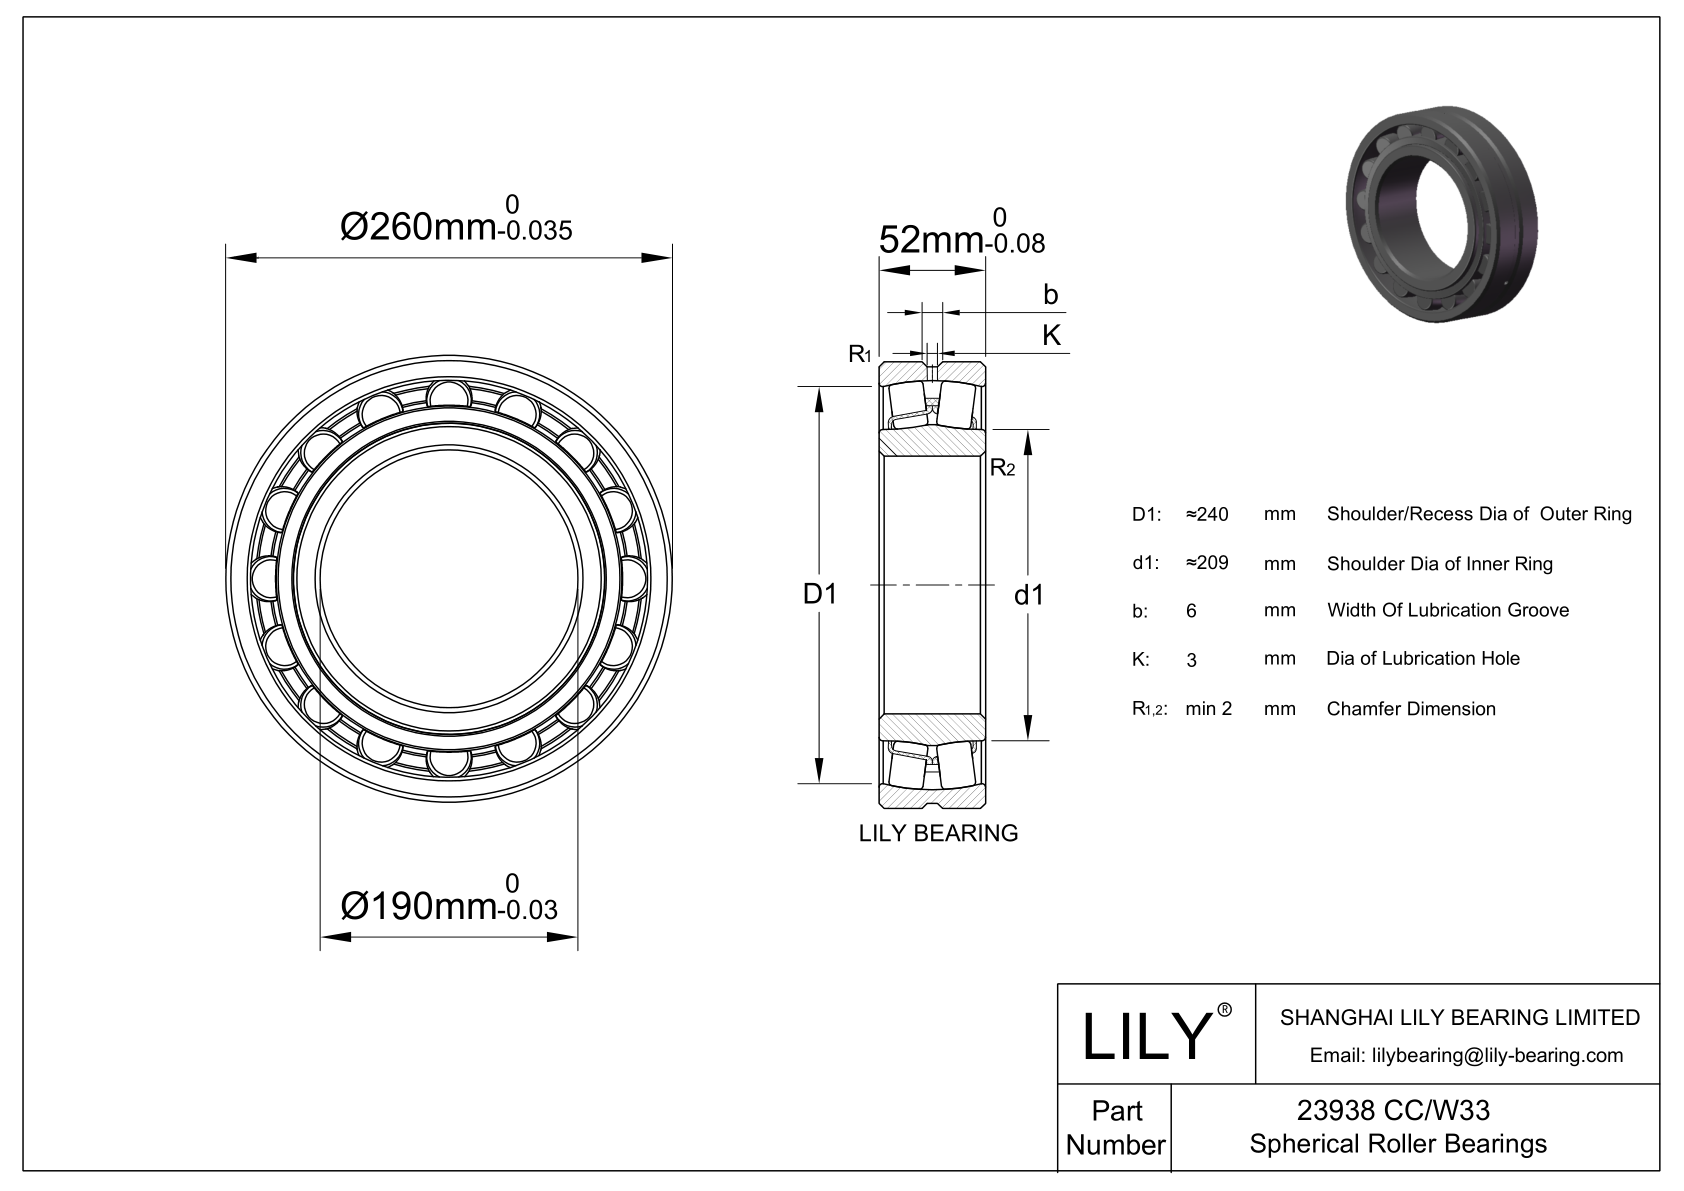 23938 CC/W33 Double Row Spherical Roller Bearing cad drawing